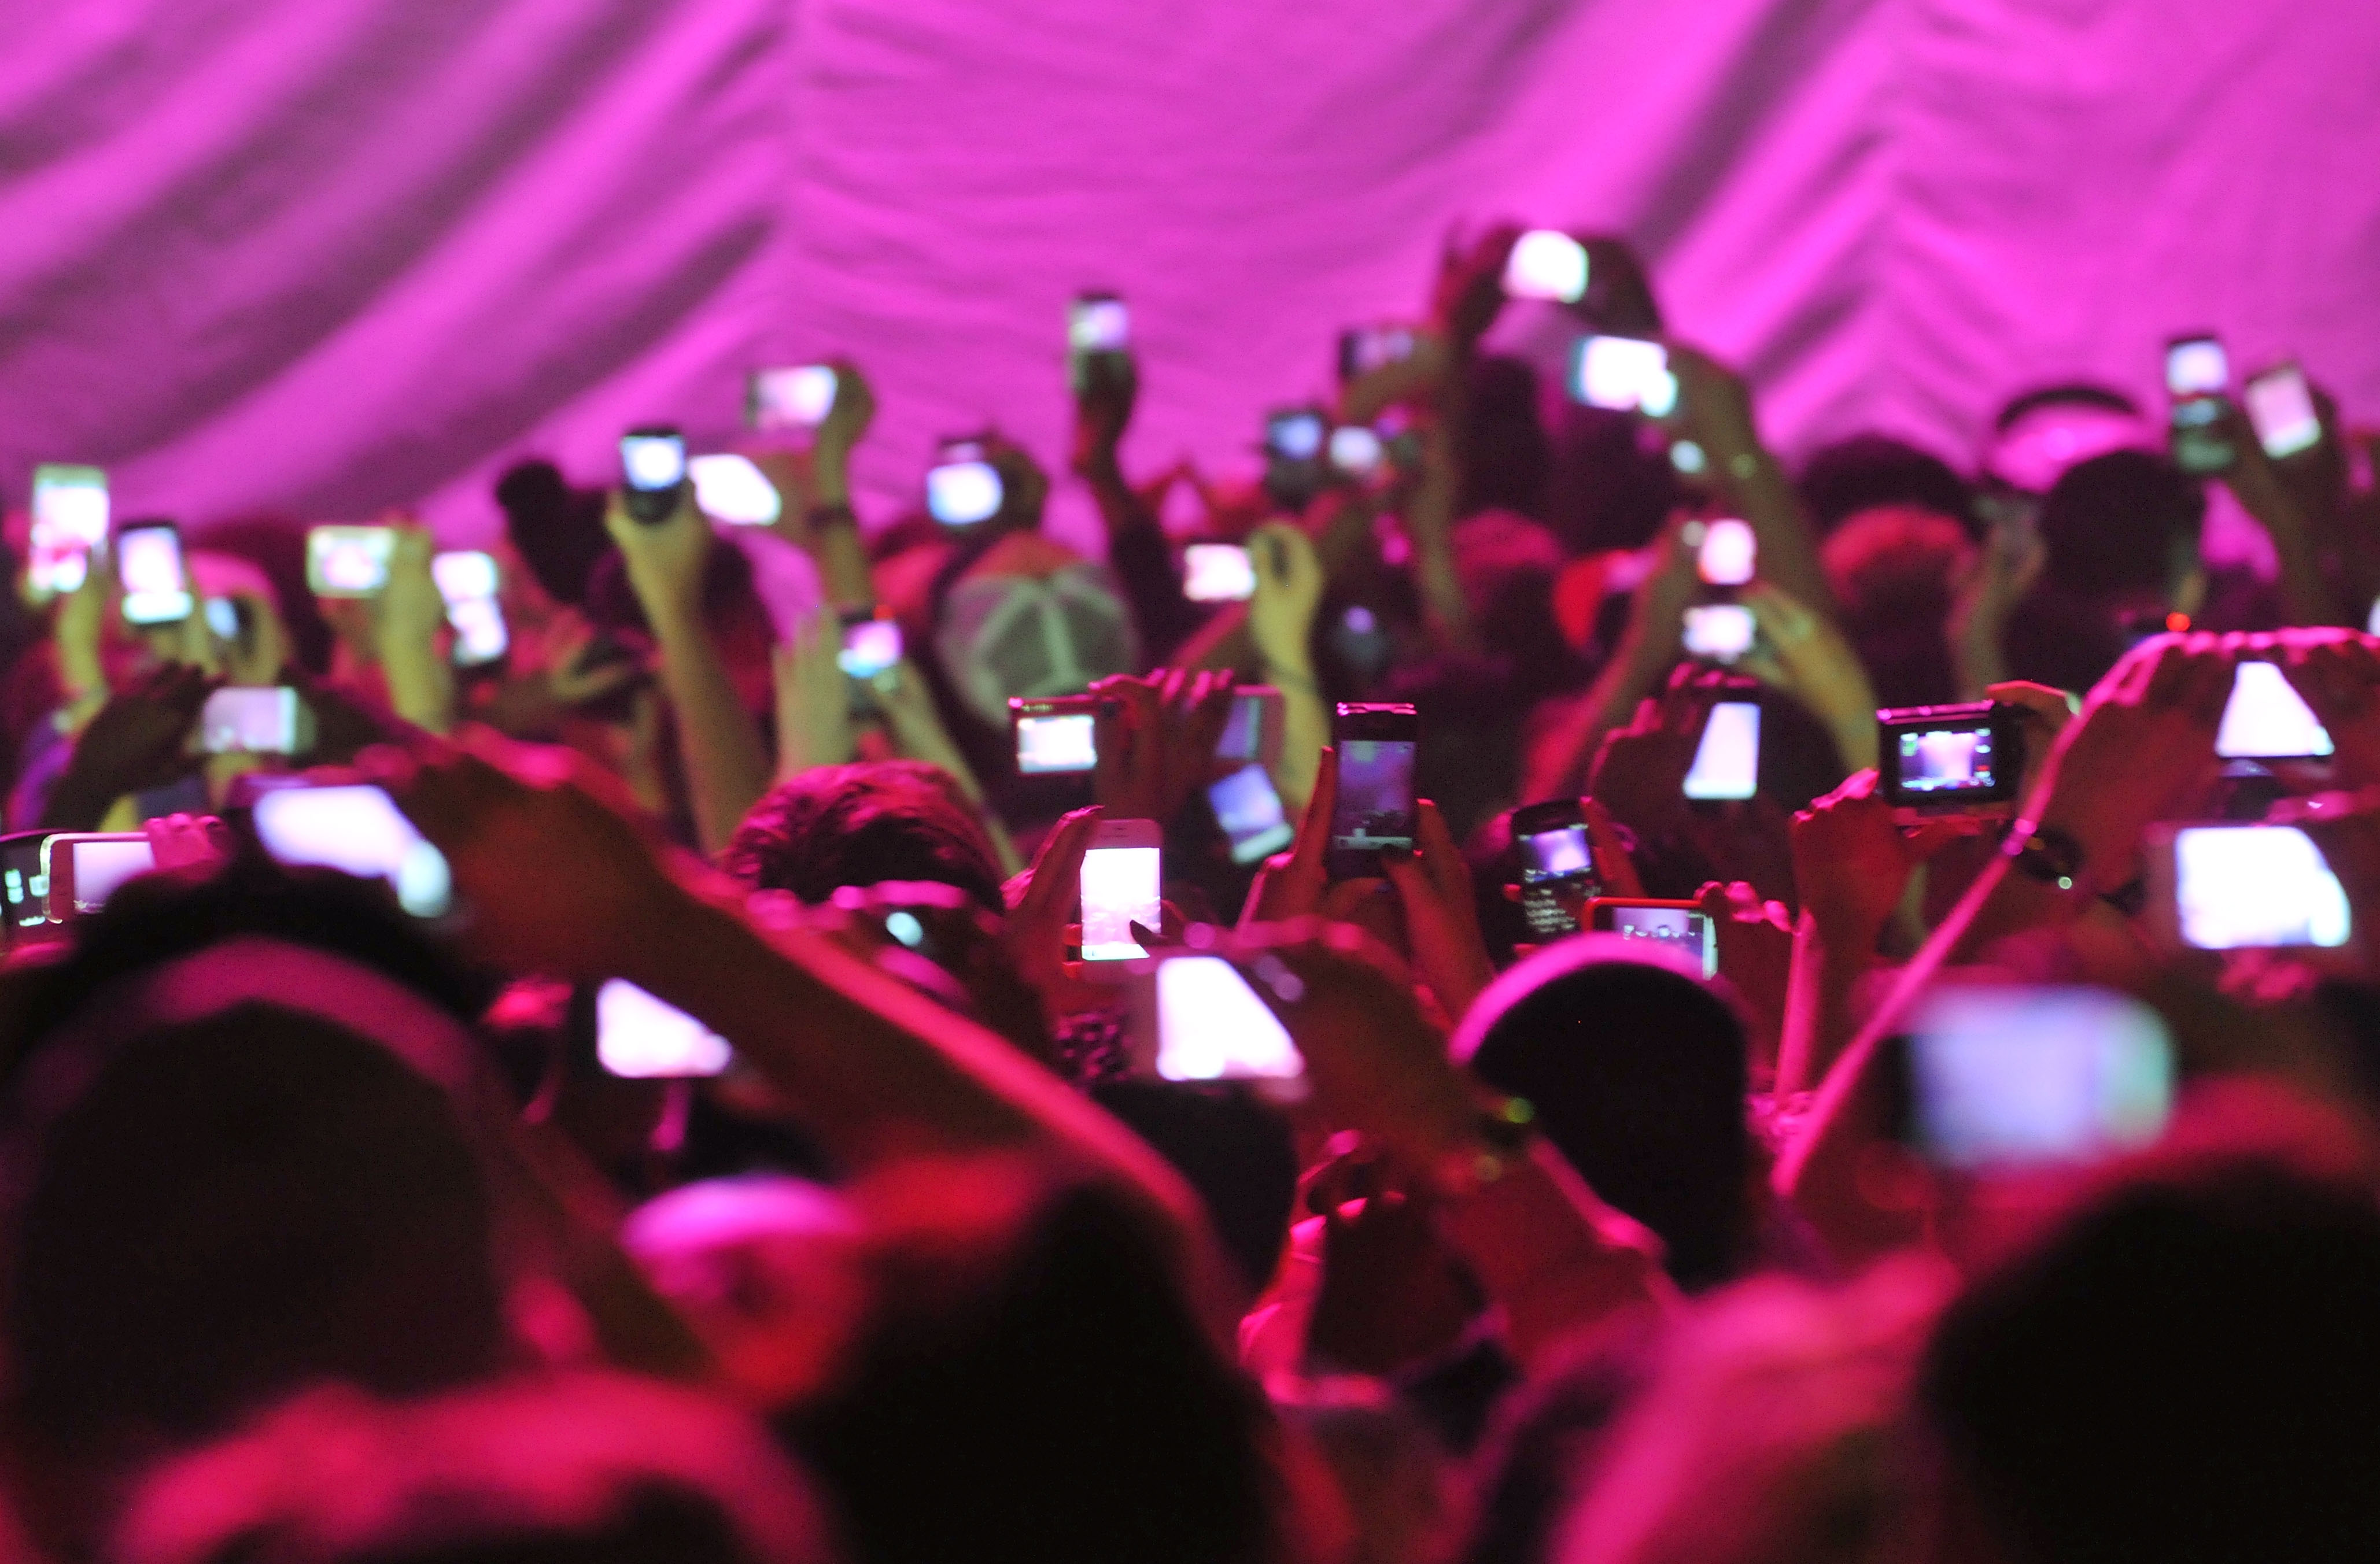 Members of the audience hold up cameras and mobile telephones as American rapper and R&amp;B singer Nicki Minaj takes to the stage stage during her 'Pink Friday' tour at HMV Hammersmith Apollo on June 24, 2012 in London, United Kingdom.